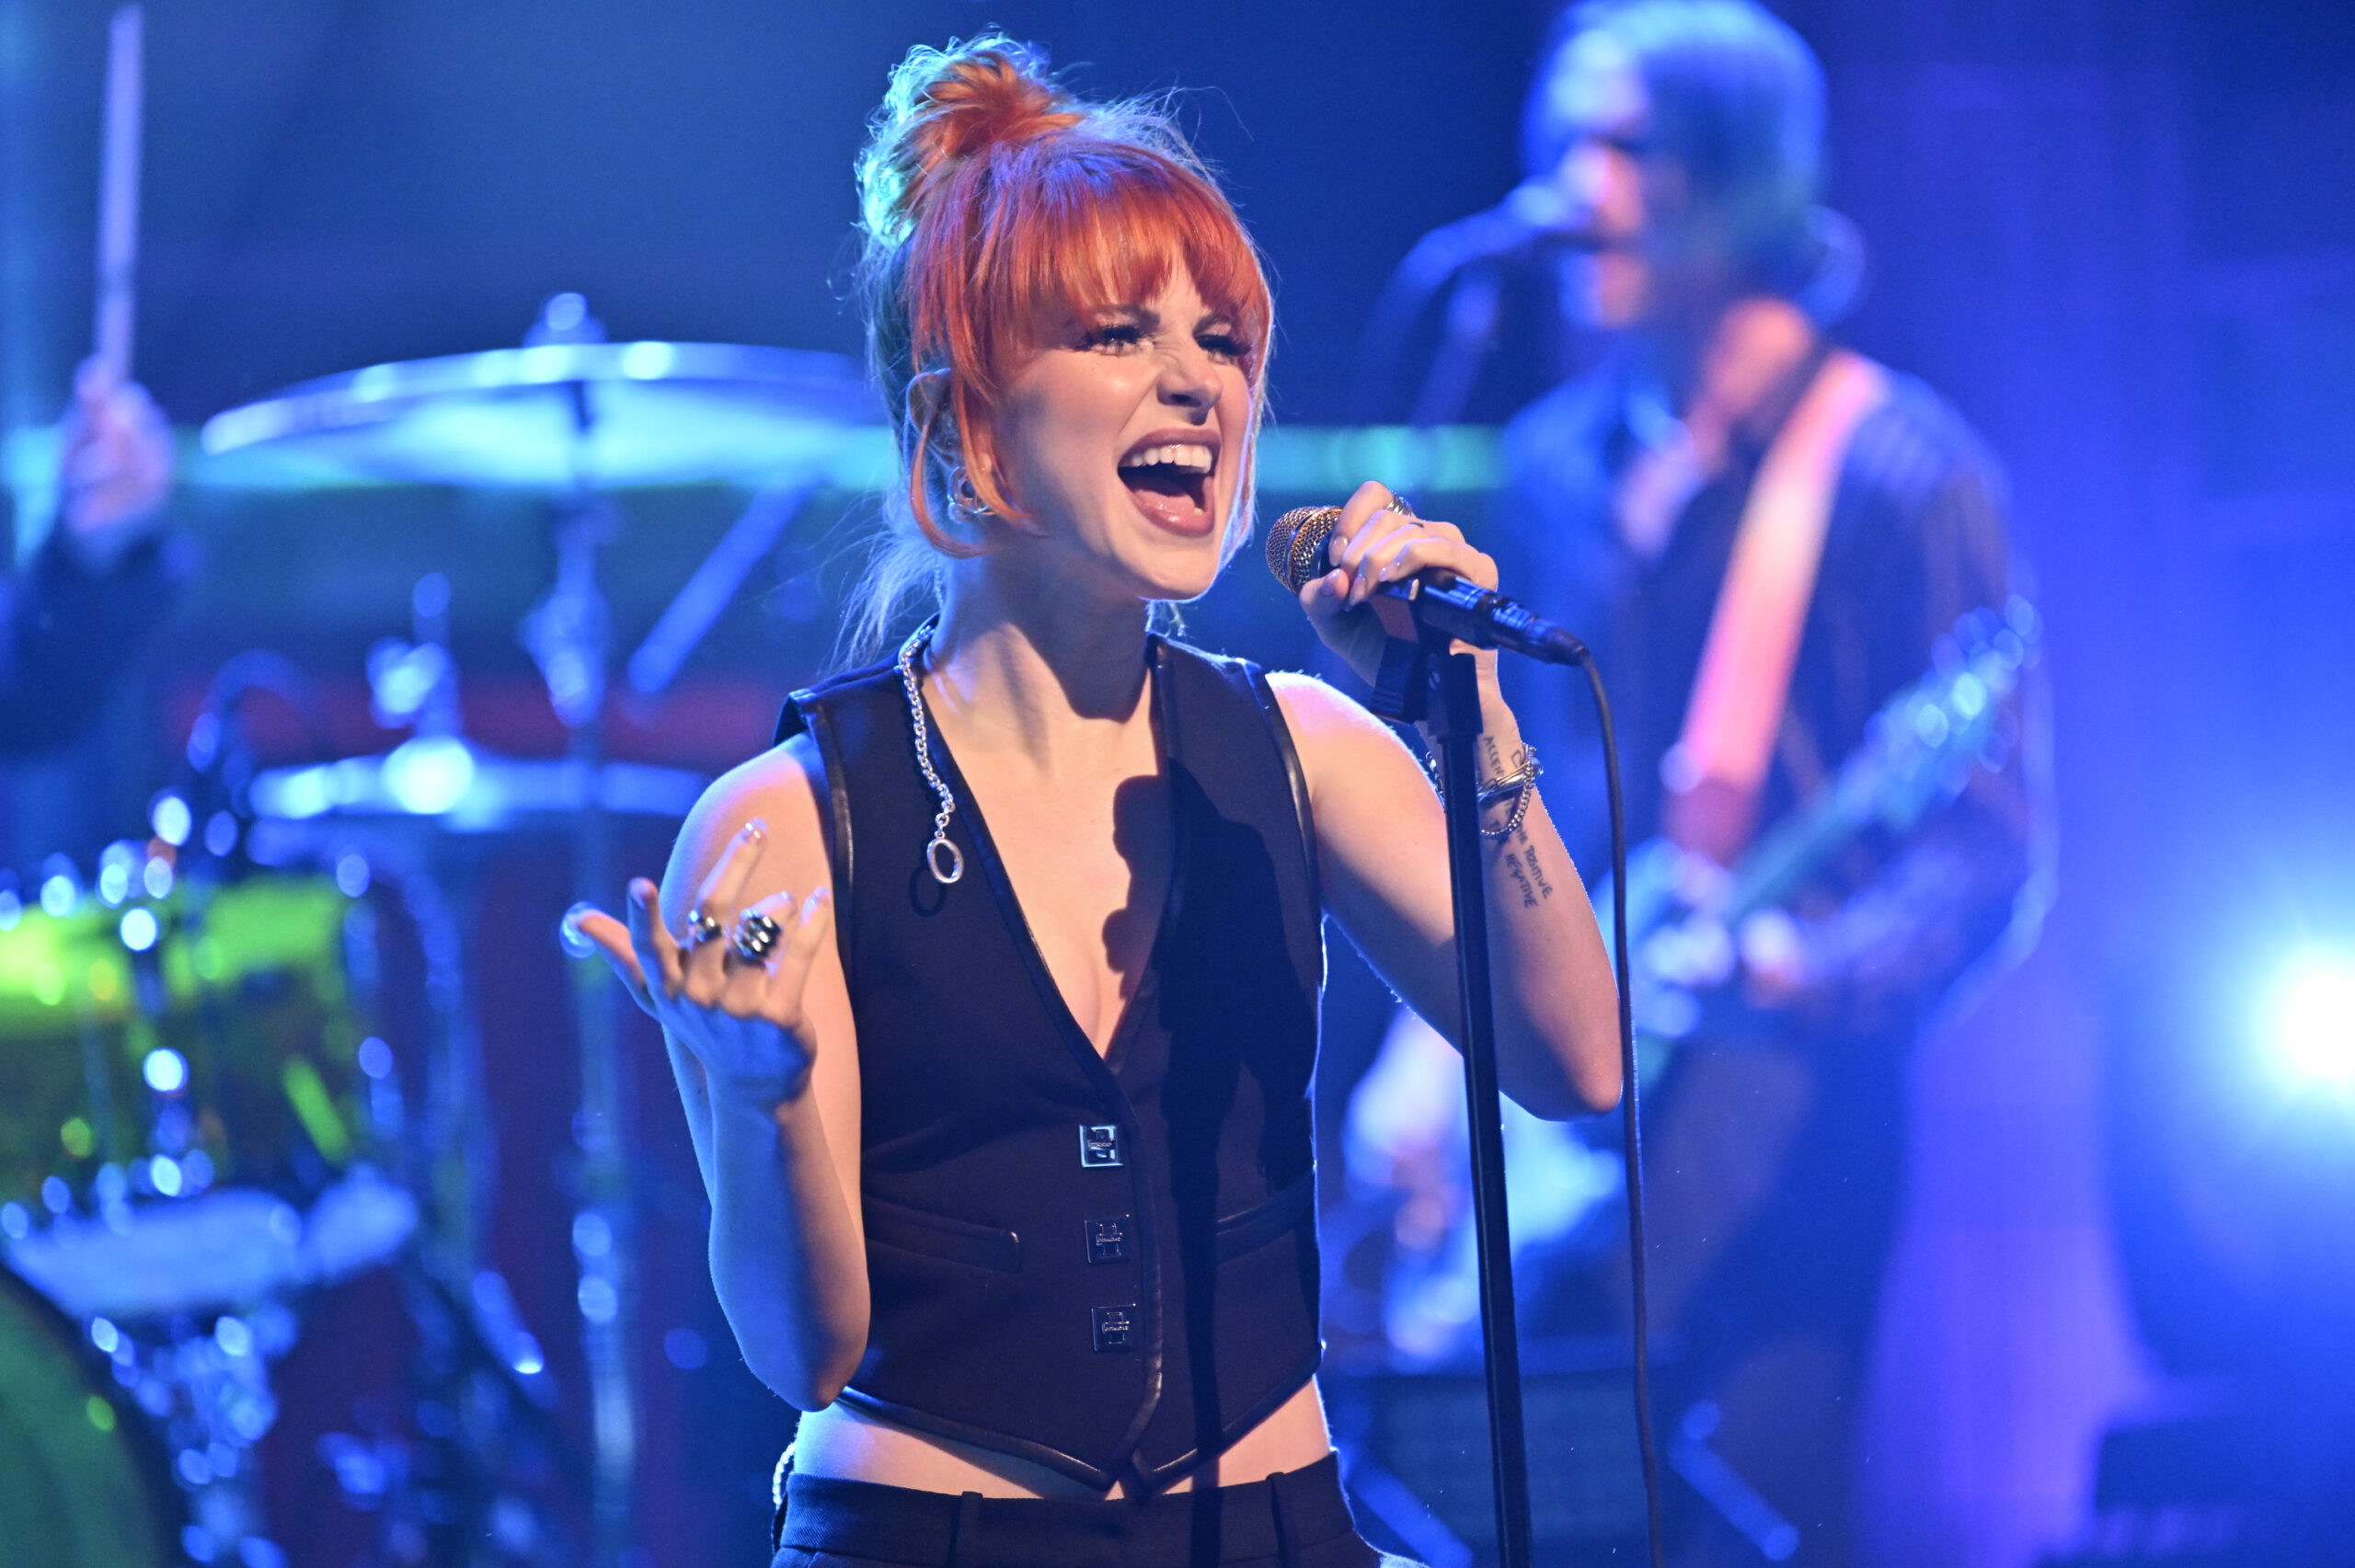 Paramore's Hayley Williams. (Photo: Todd Owyoung / NBC via Getty Images)